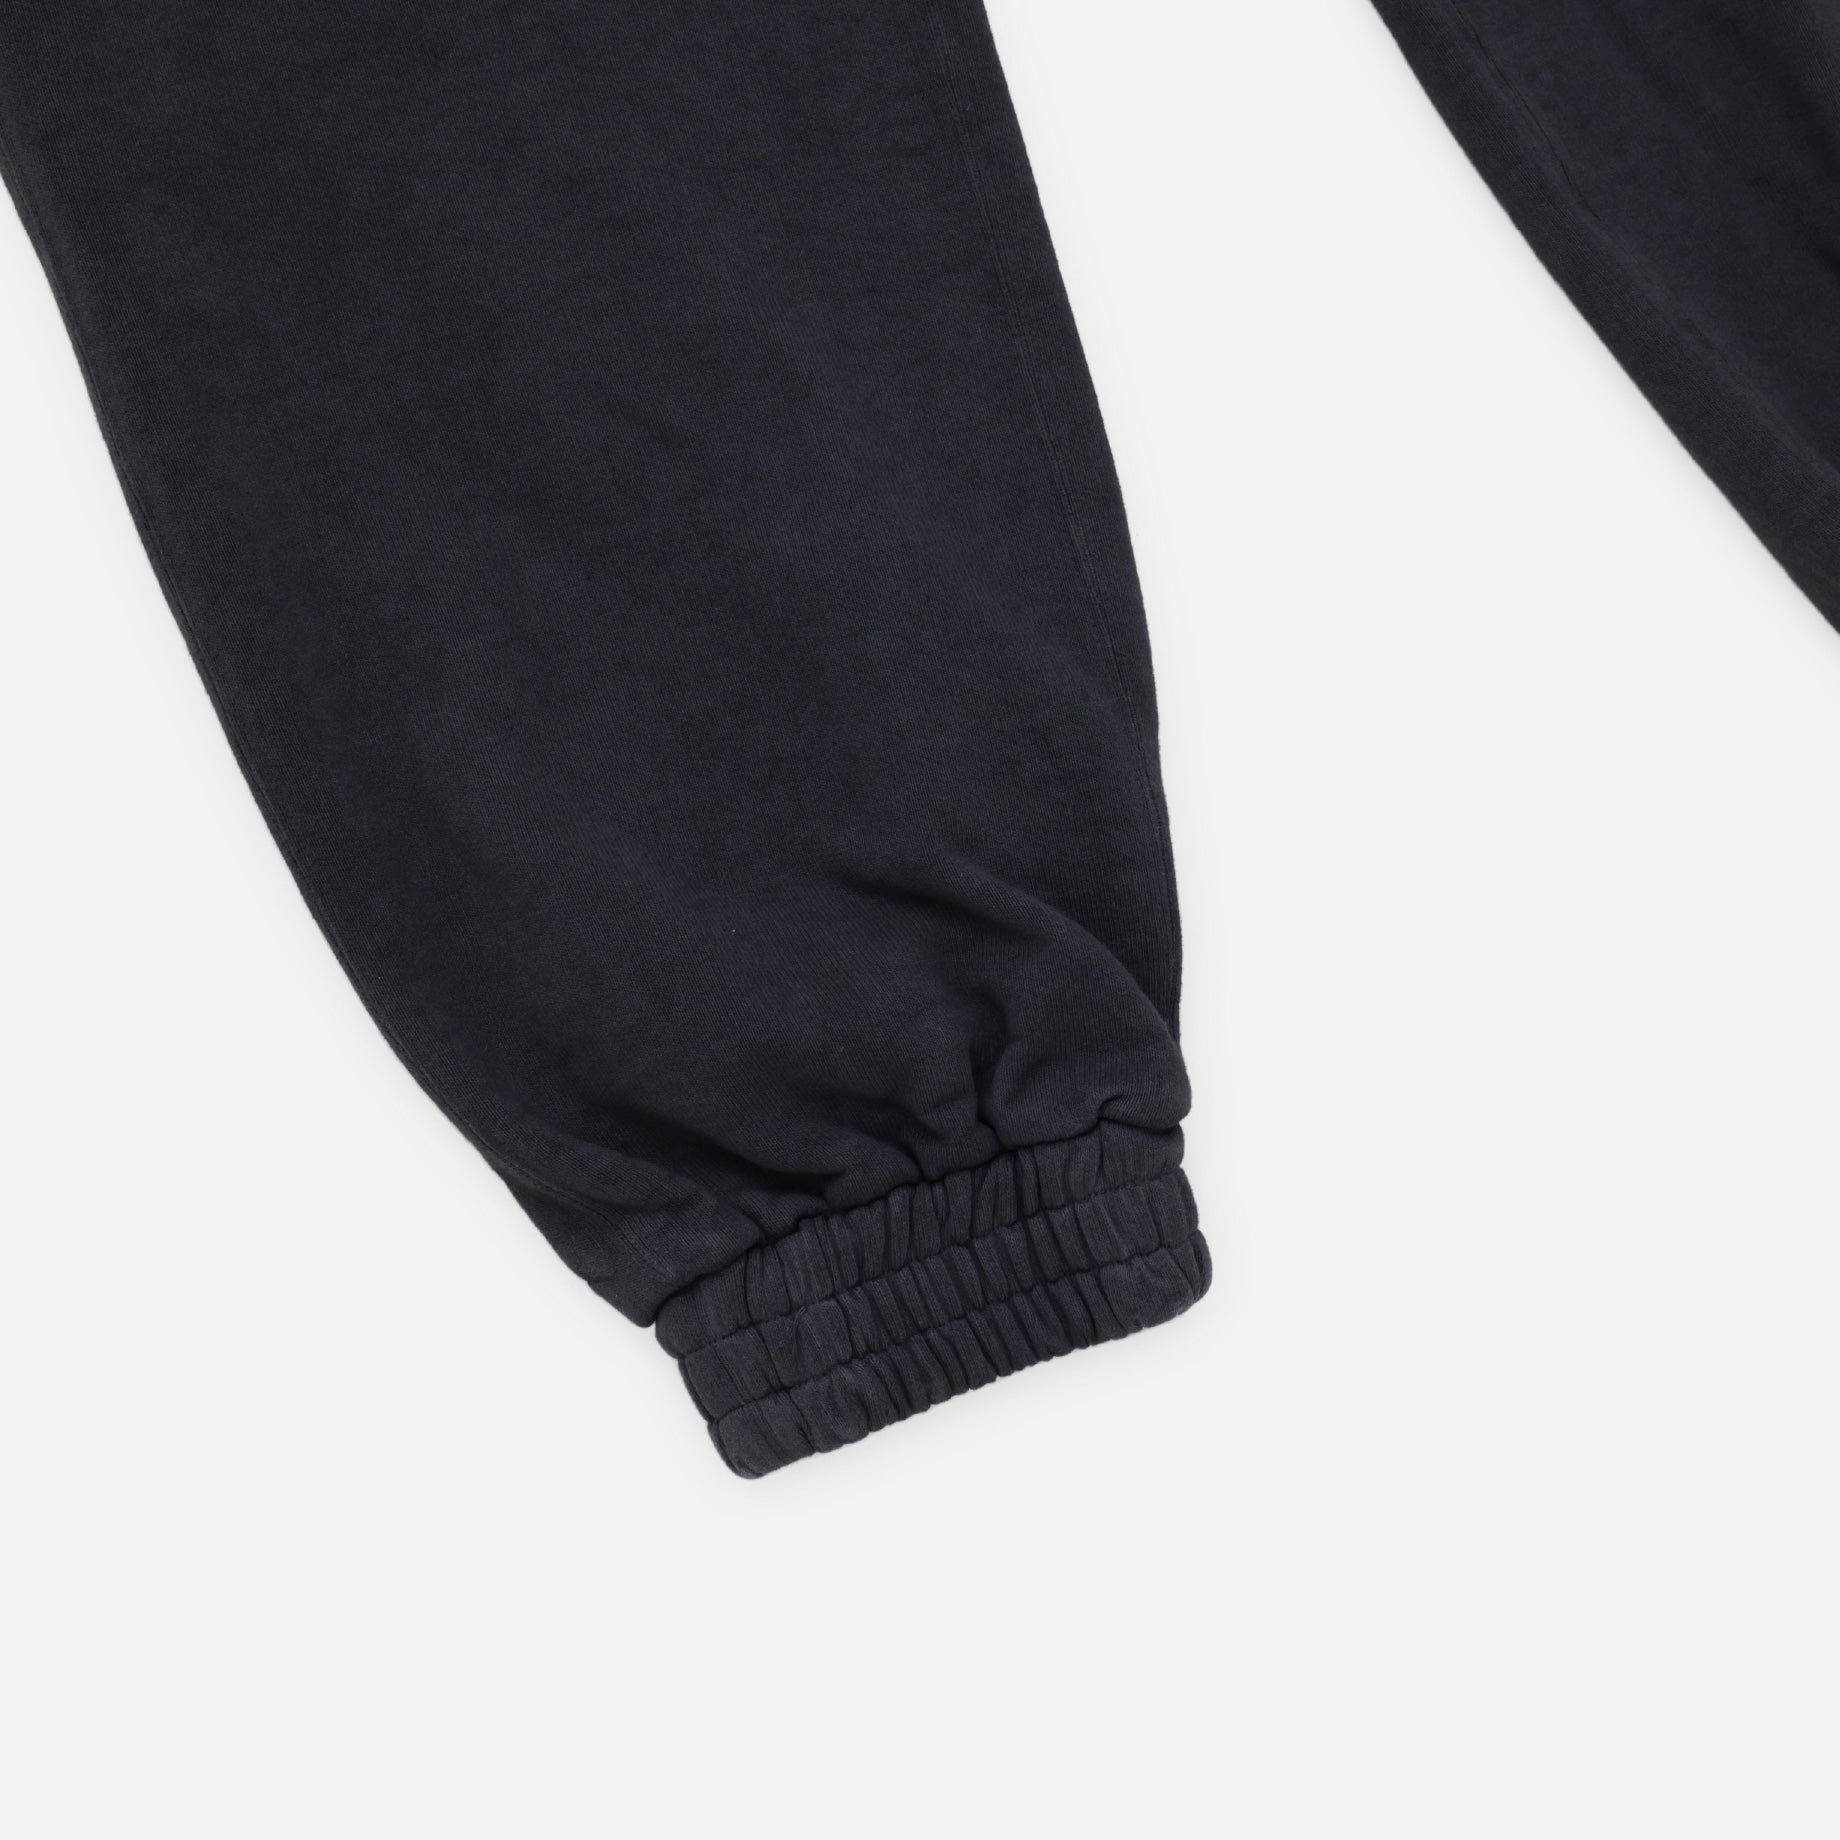 COLLEGE PRINTED SWEAT TROUSERS（AGED BLACK）